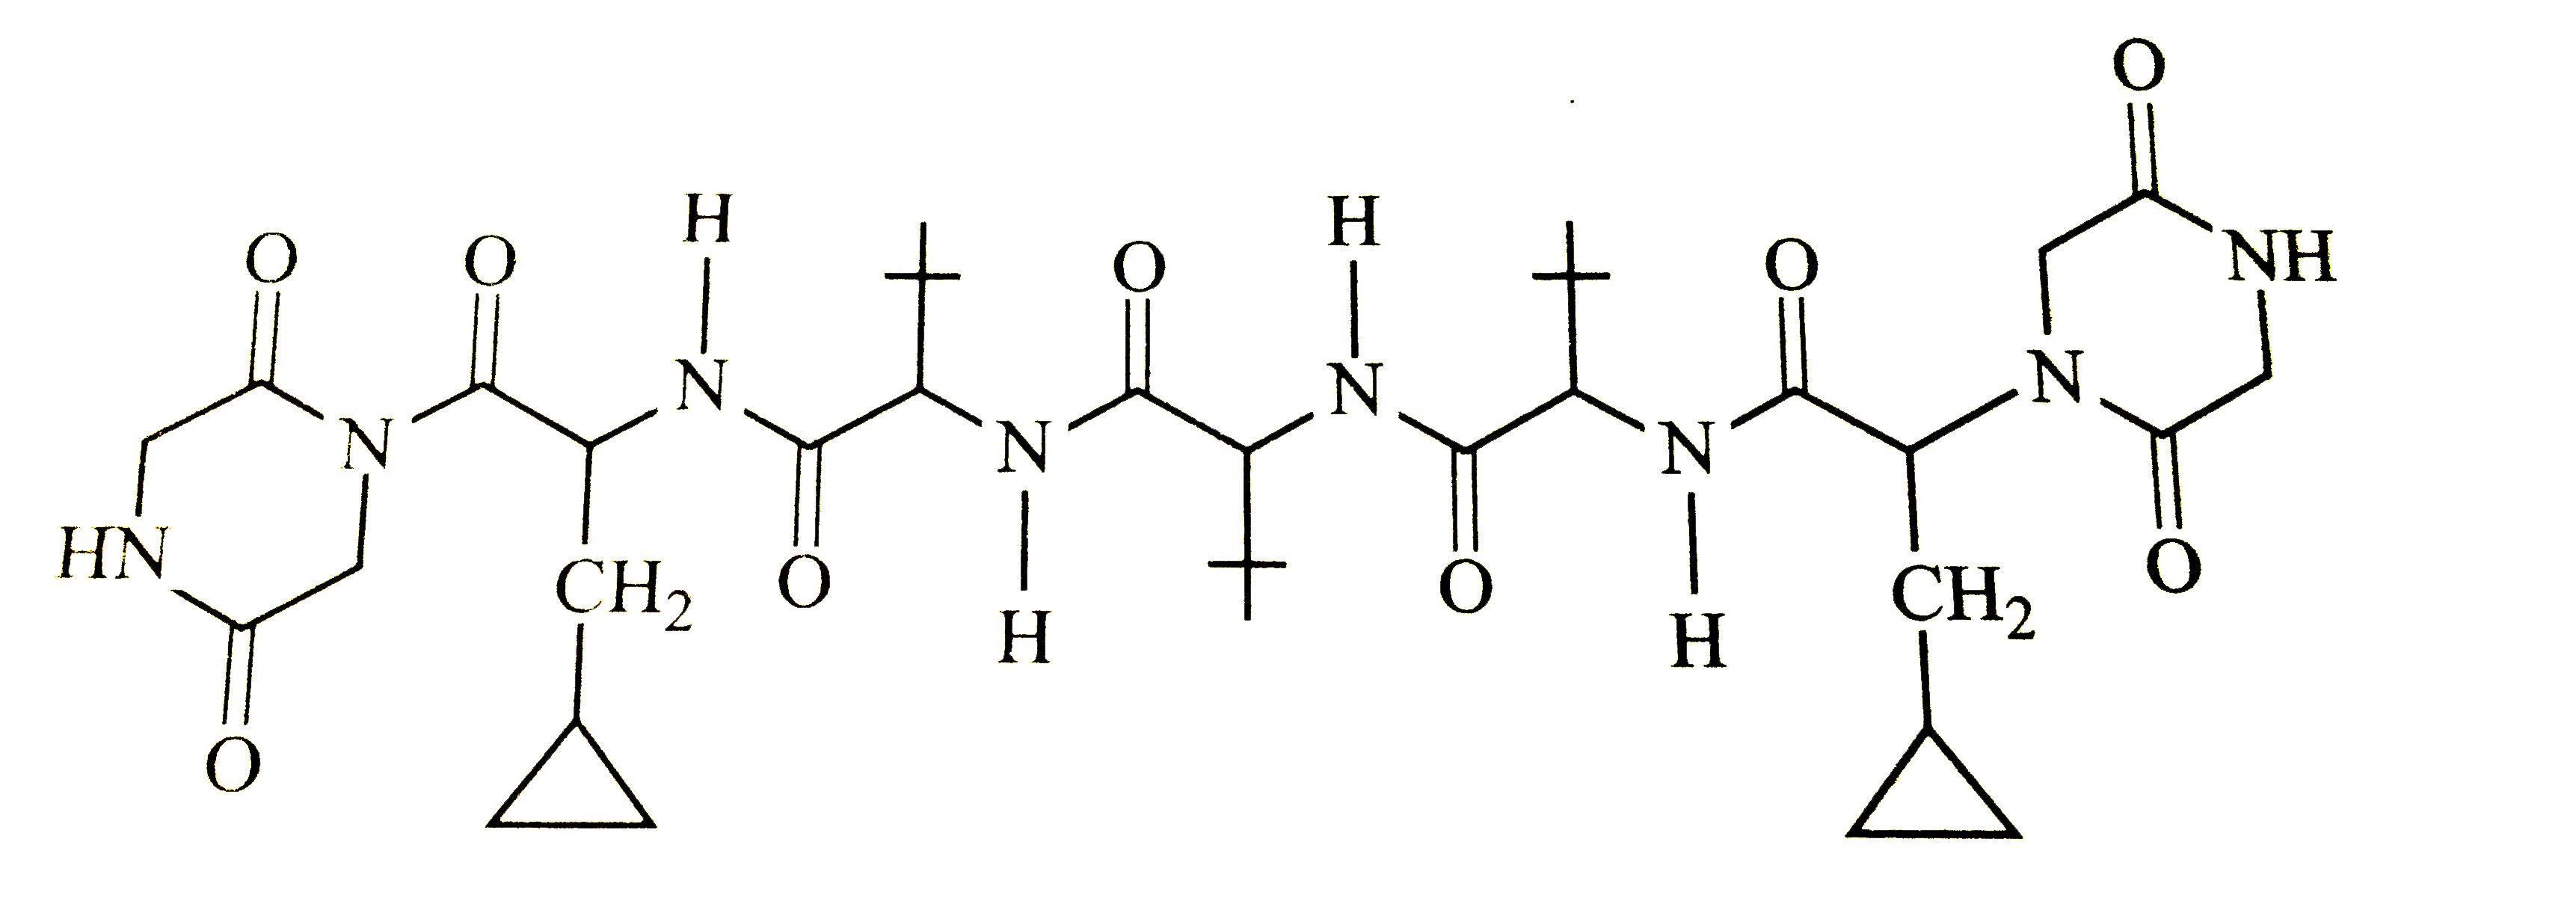 The total number of distinct naturally occuring amino acids obtained by complete acidic hydrolysis of the peptide shown below is